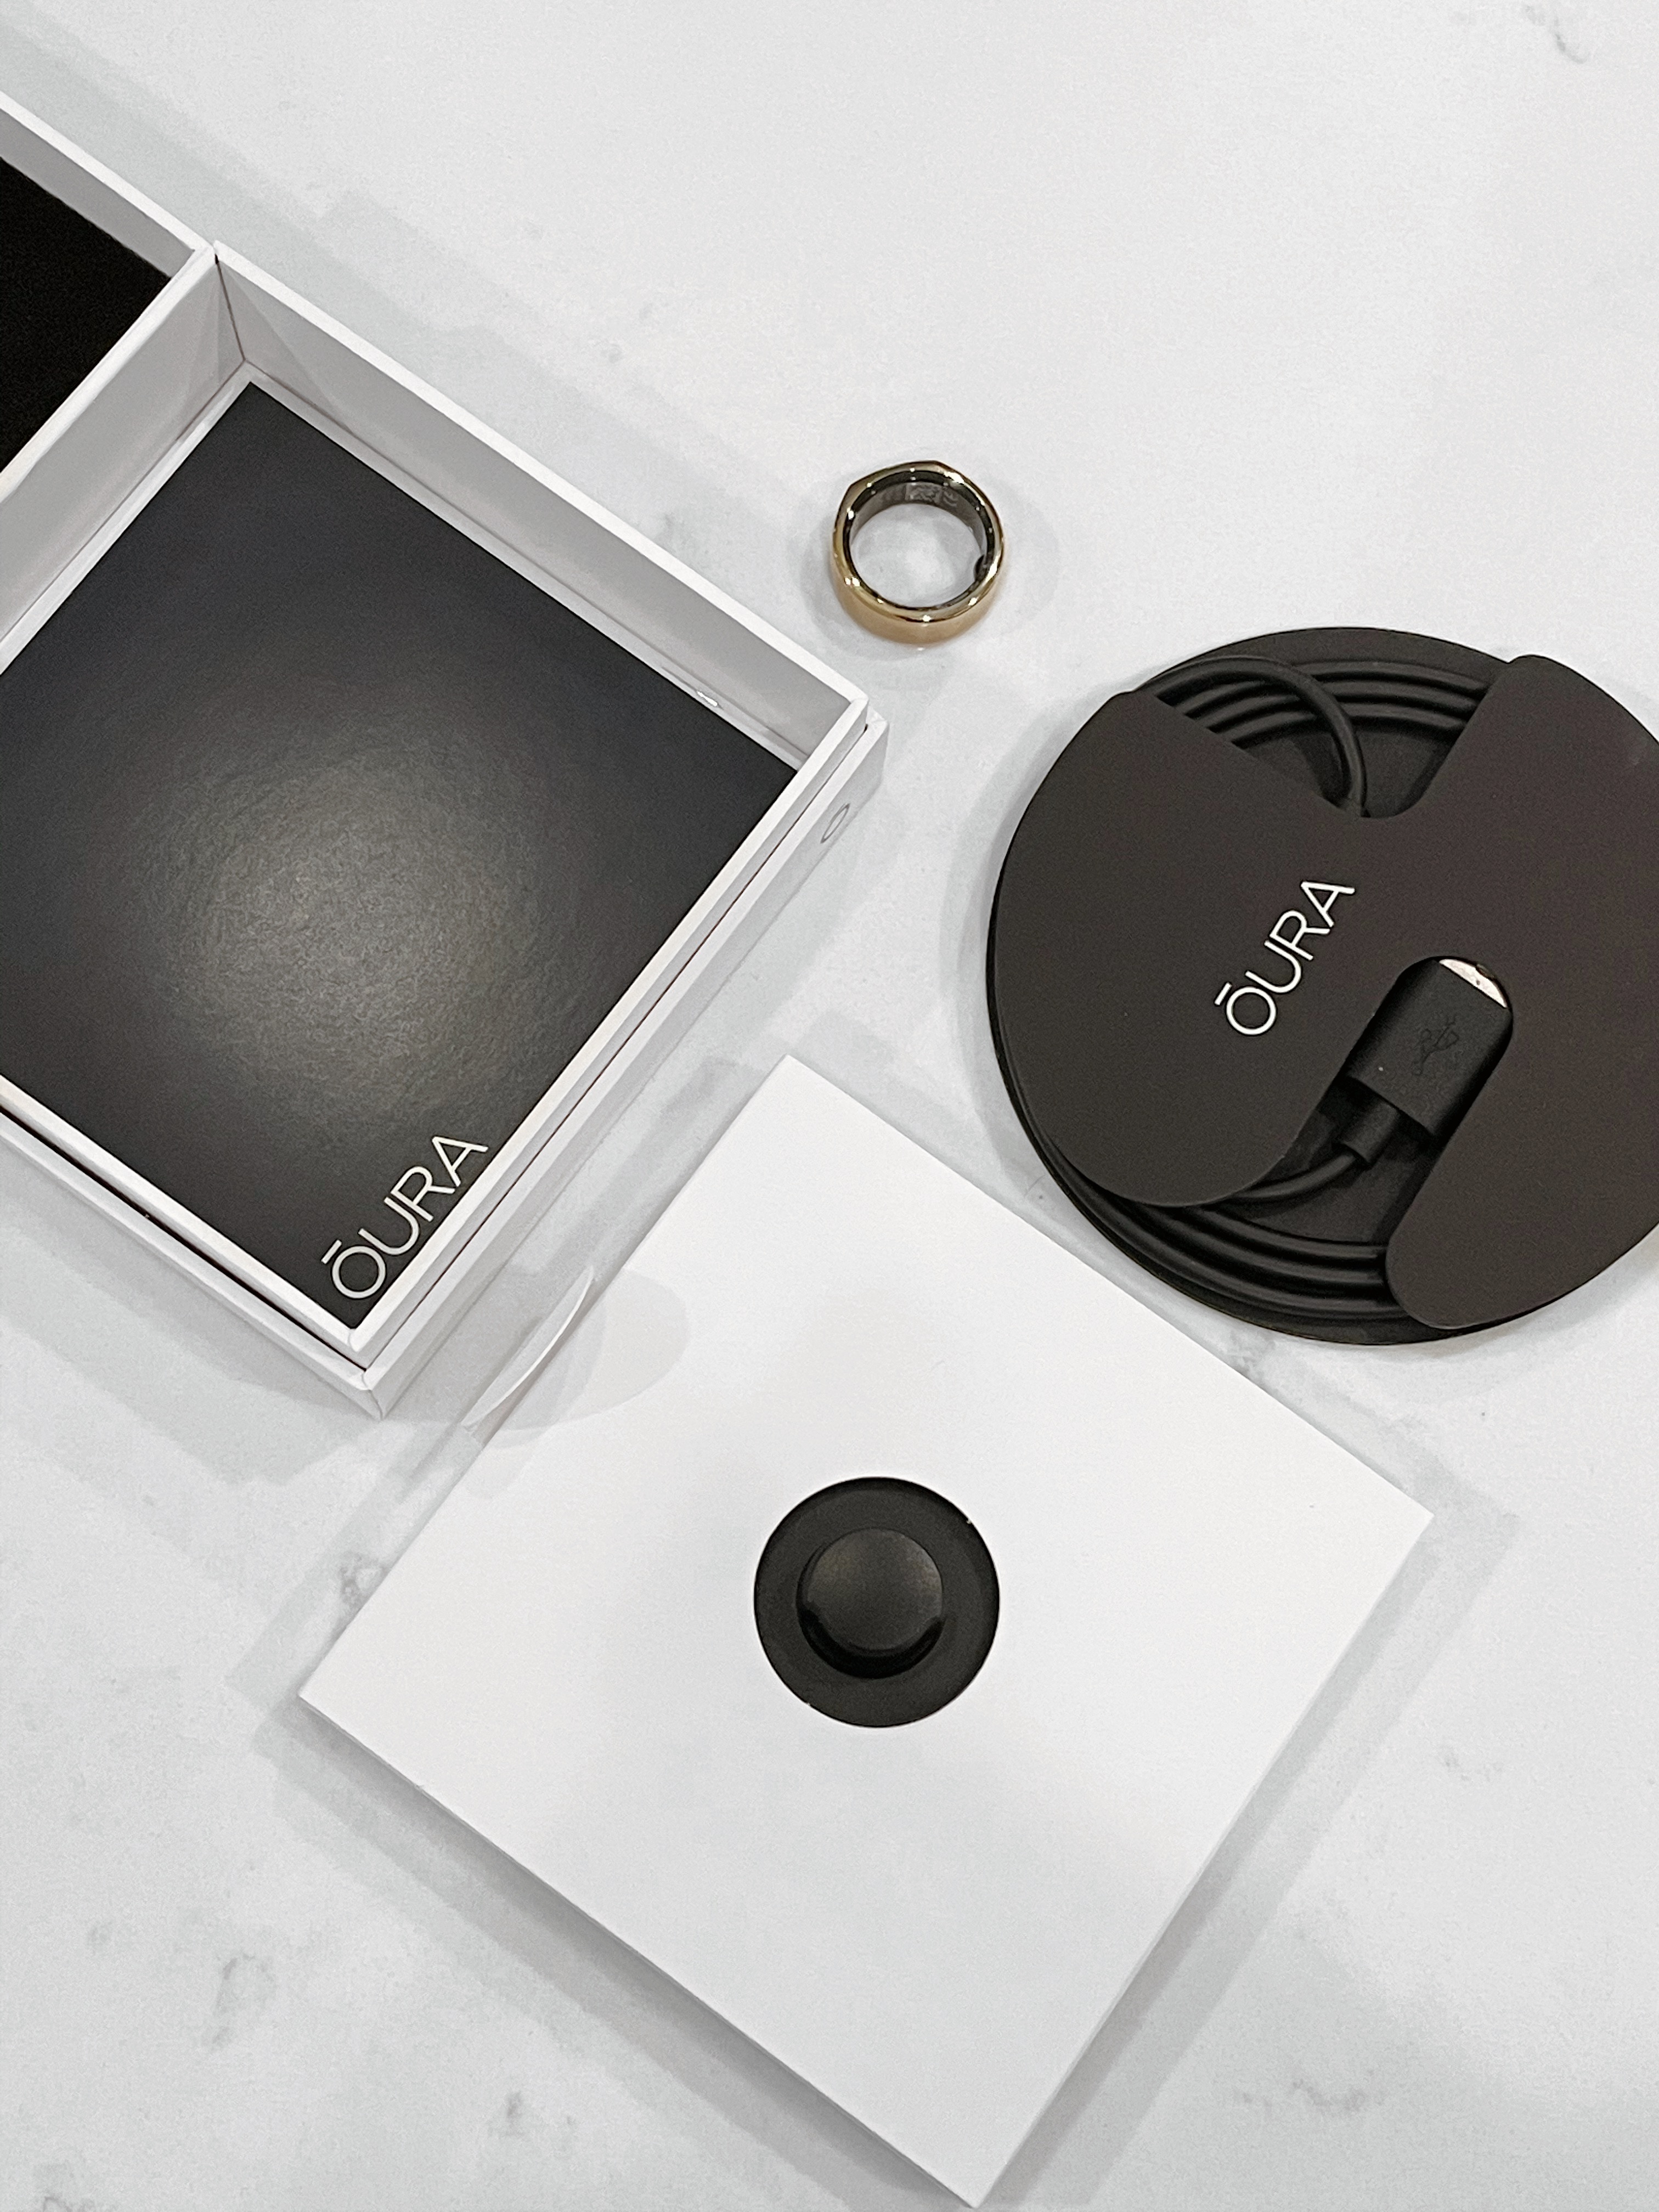 oura-ring-review-unboxing-the-Kristen-diary-blog